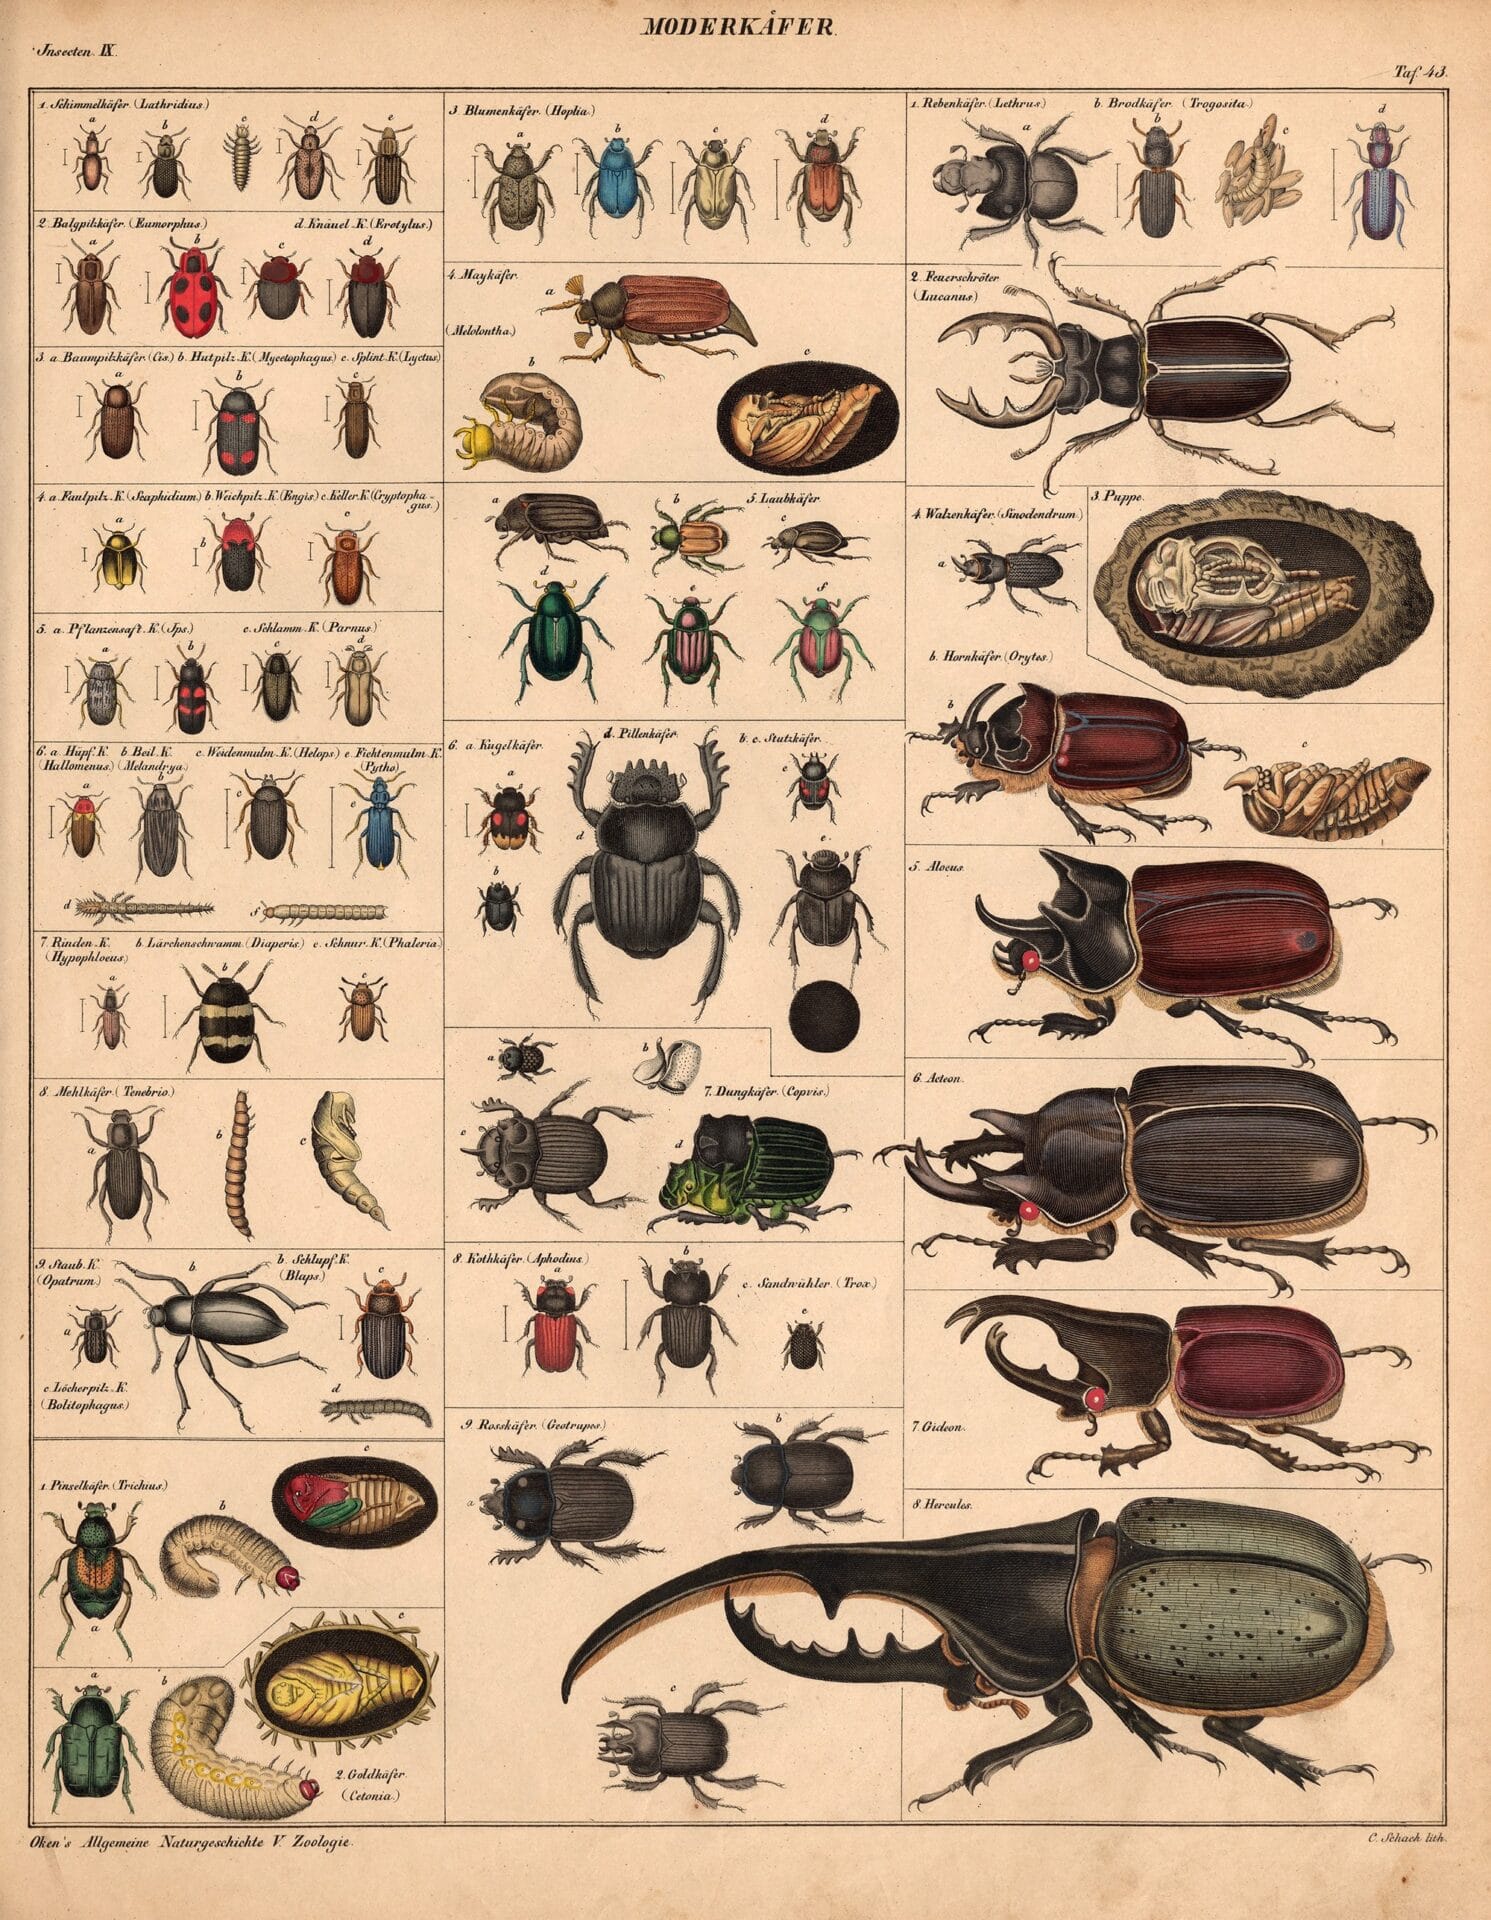 an 18th-century natural history book illustration of numerous beetles, organized by size and color into classifications in a chart